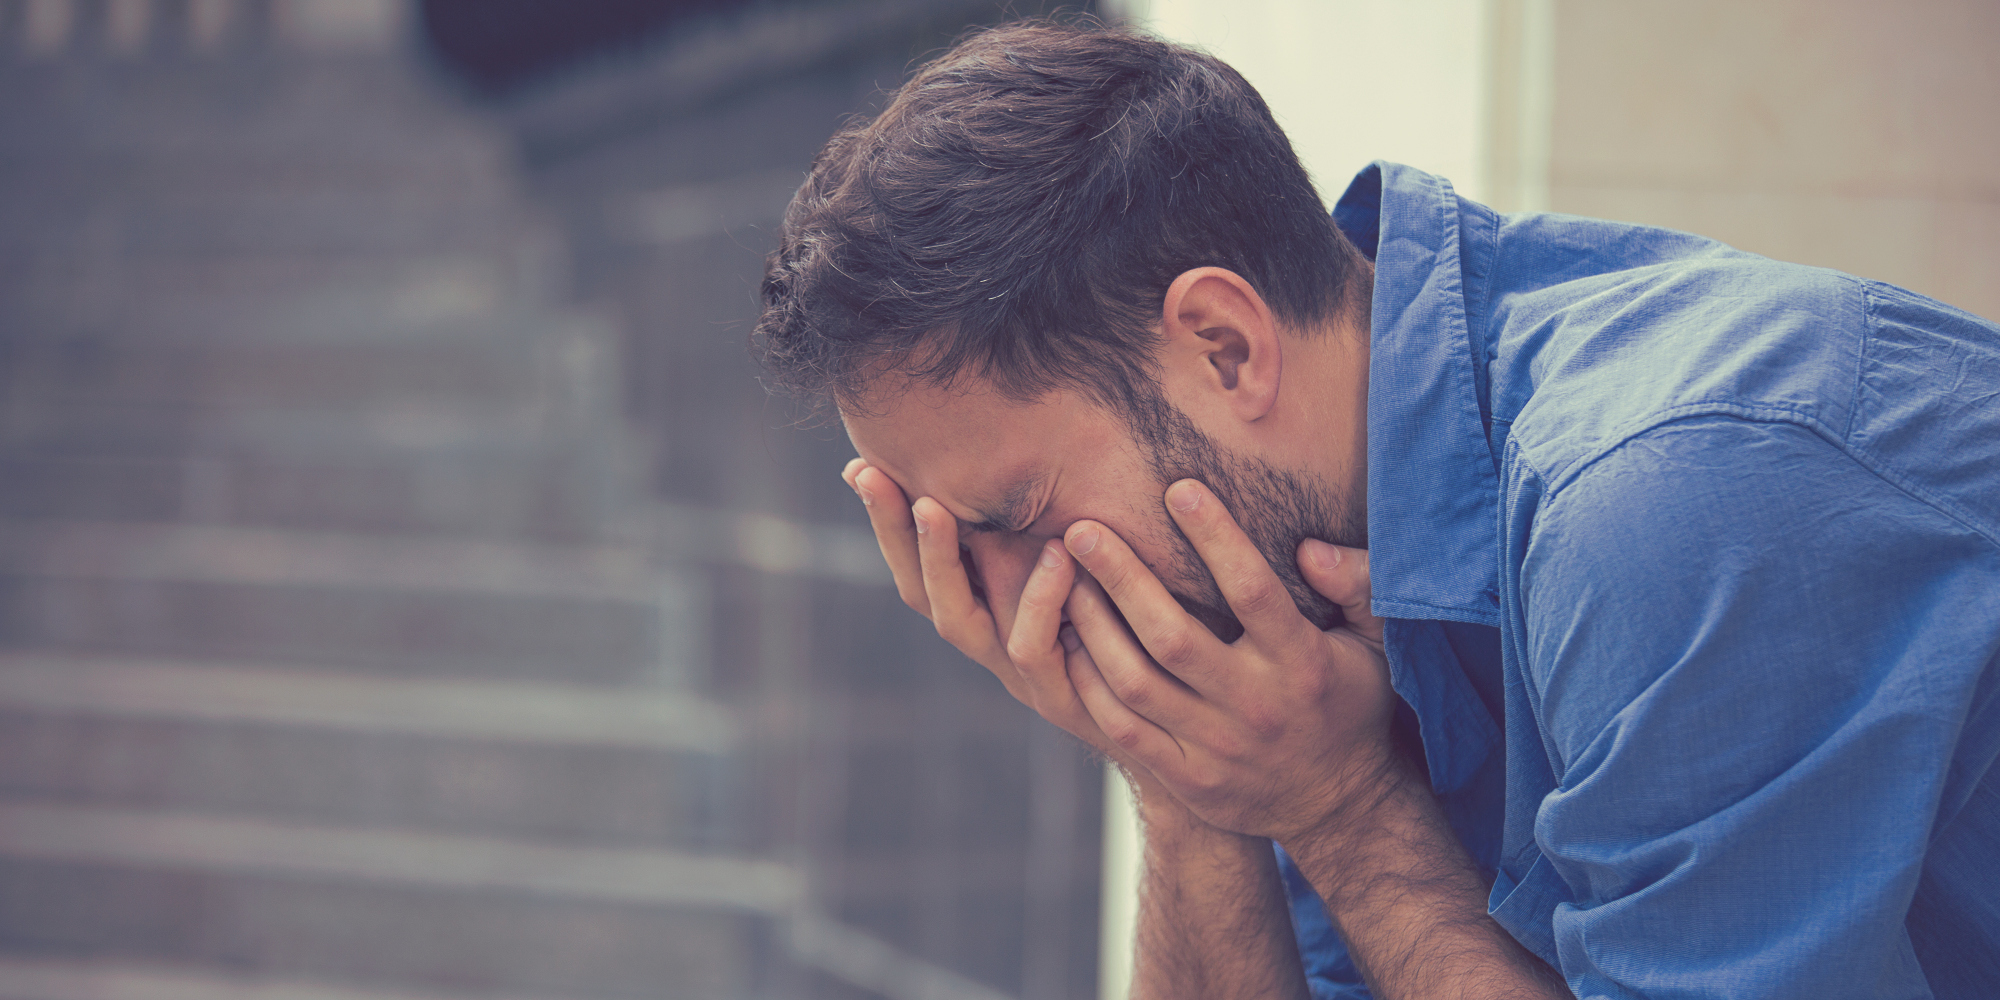 There's Nothing Wrong With Men Crying | HuffPost UK